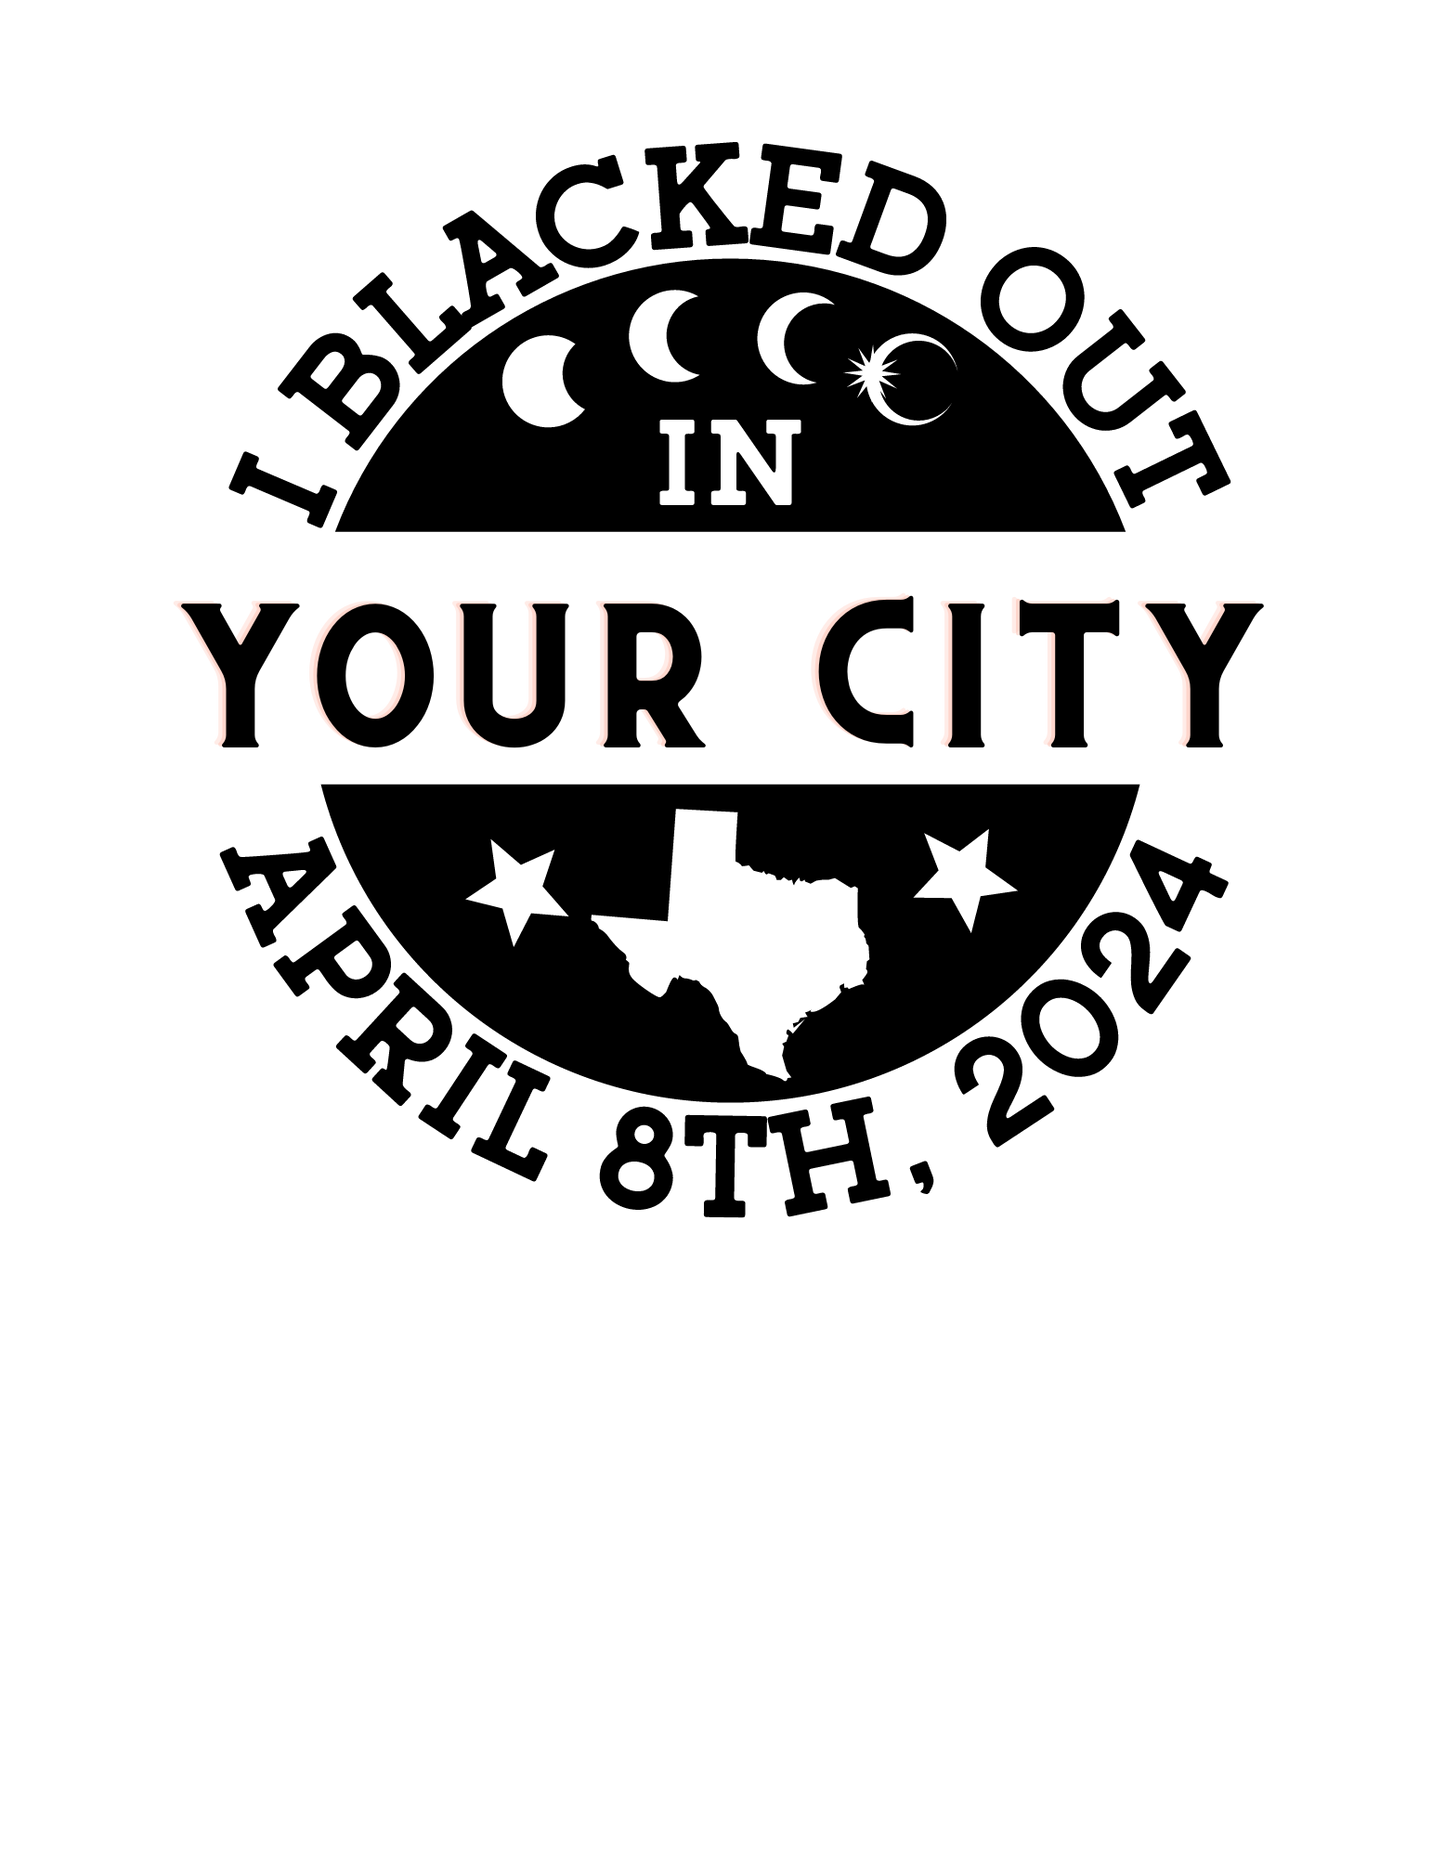 I blacked out in State/YOUR CITY- T-shirt (BLACK FONT)